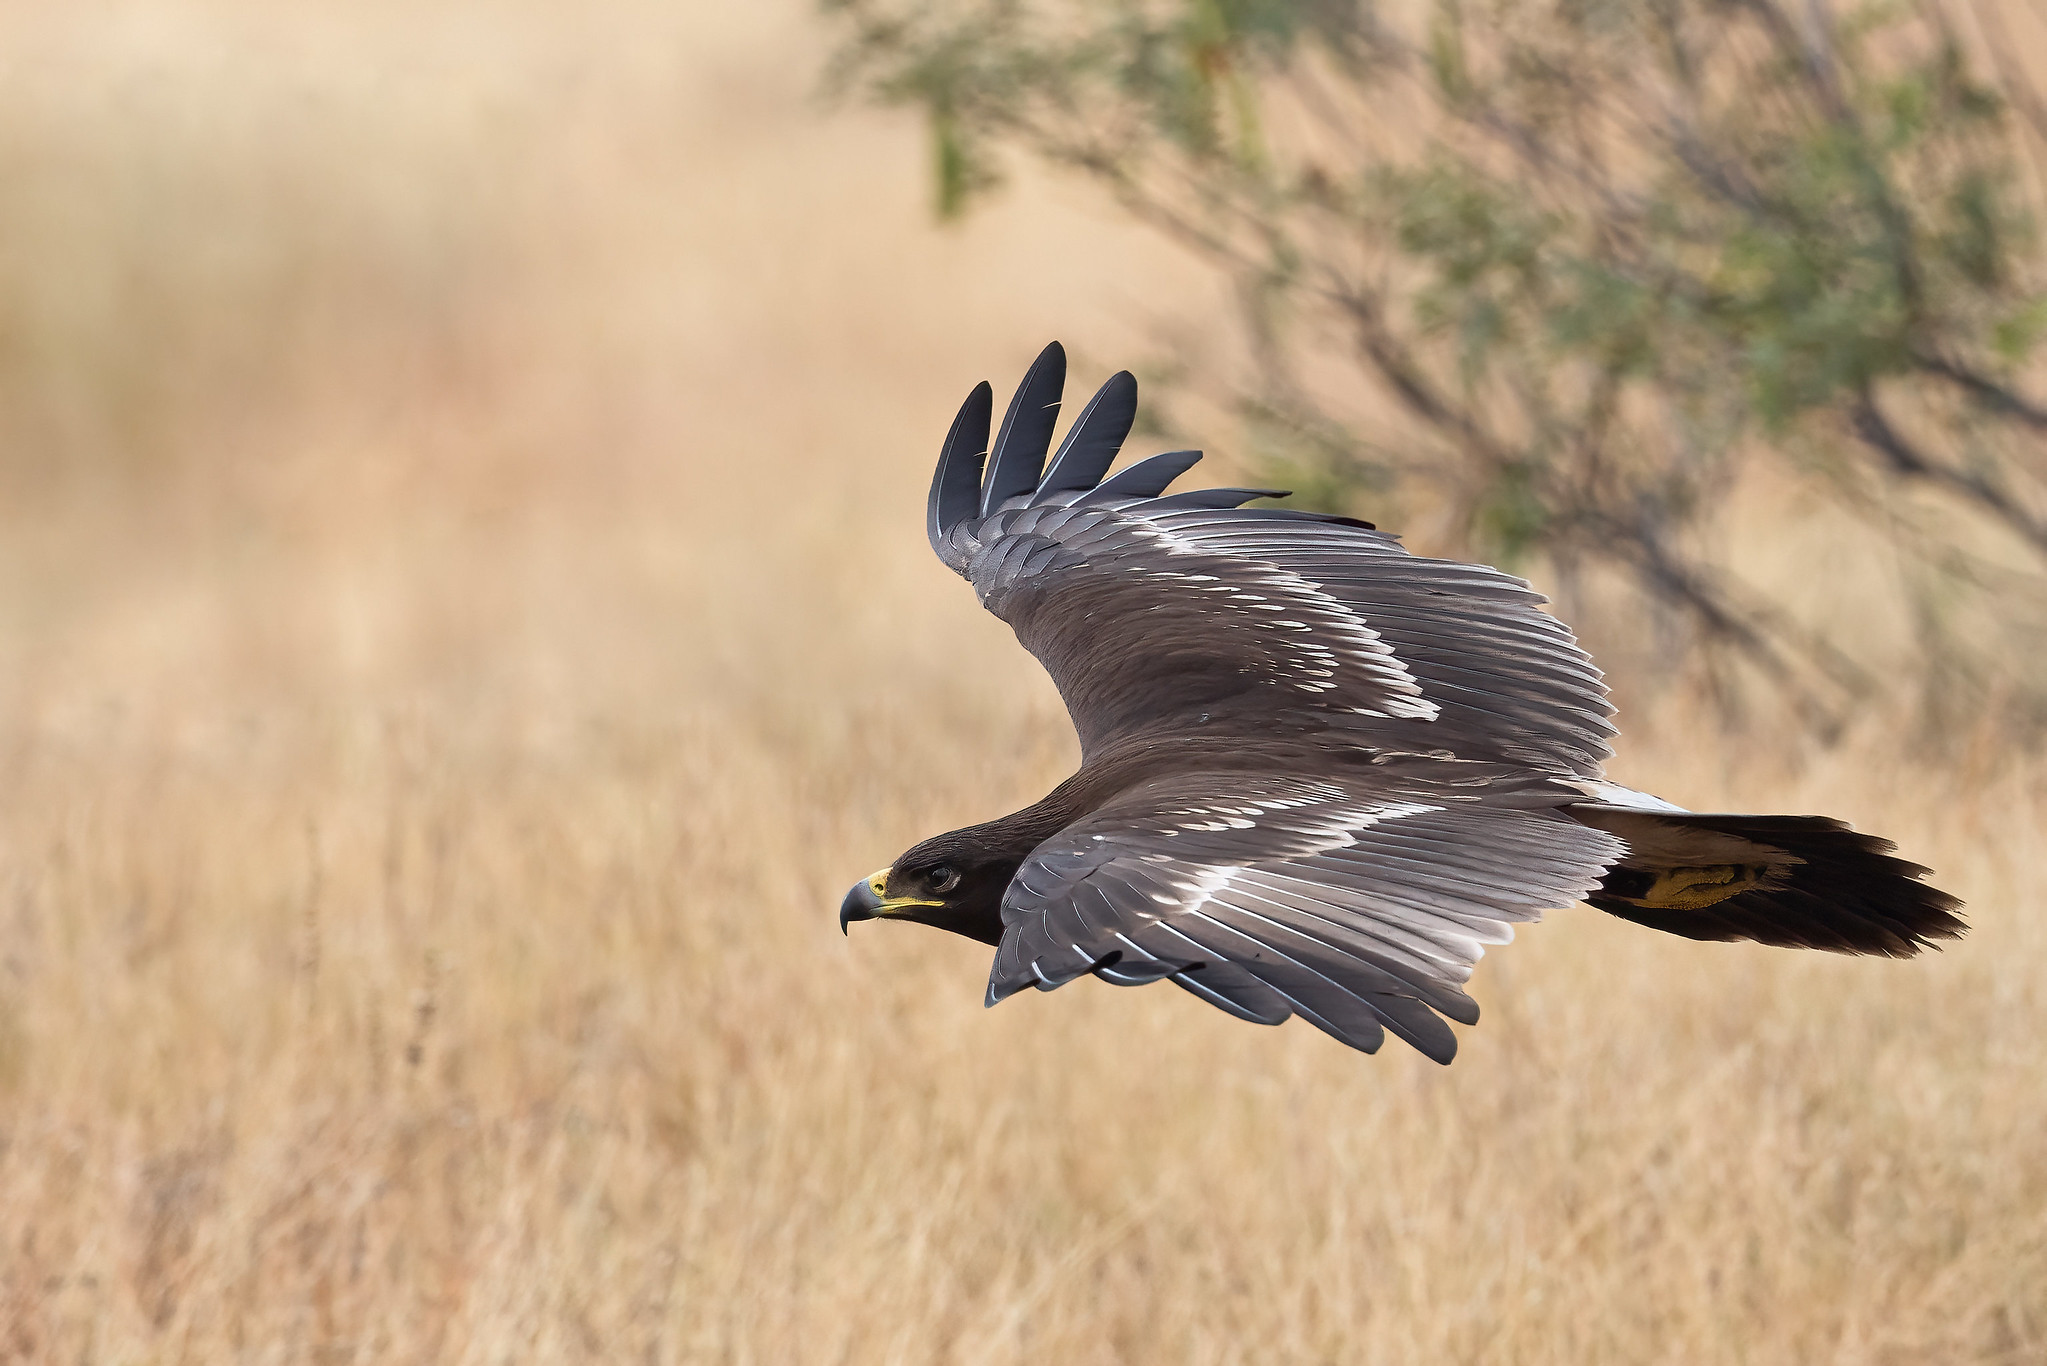 A Greater Spotted Eagle flying from perch to perch. Photo Credit: Hari K Patibanda (CC BY-NC 2.0 DEED)